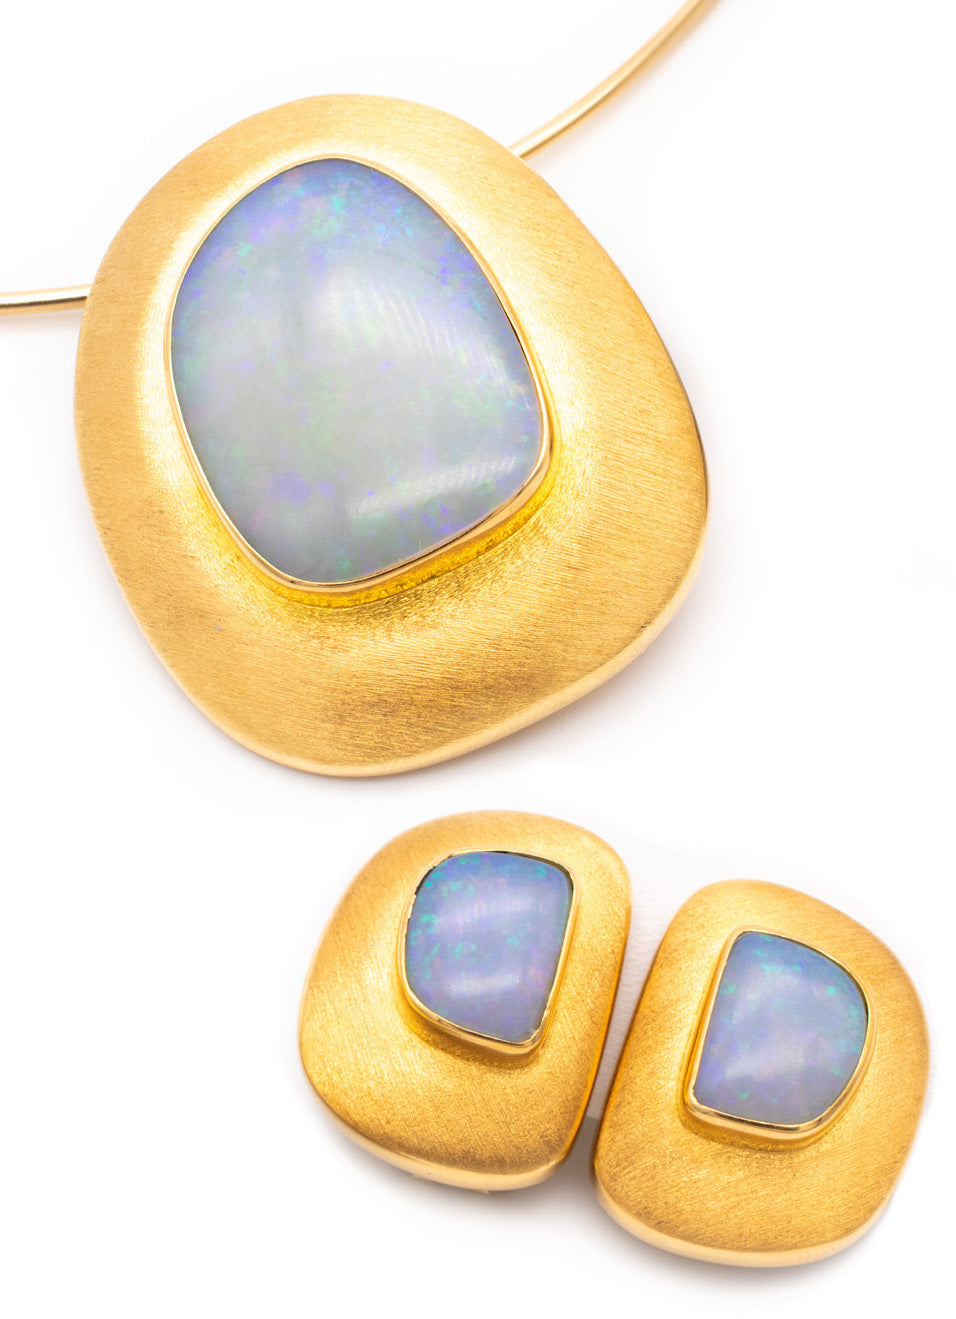 BURLE MARX & BRUNO GUIDI 18 KT GOLD EARRING AND PENDANT SET WITH 45 Cts OF OPALS